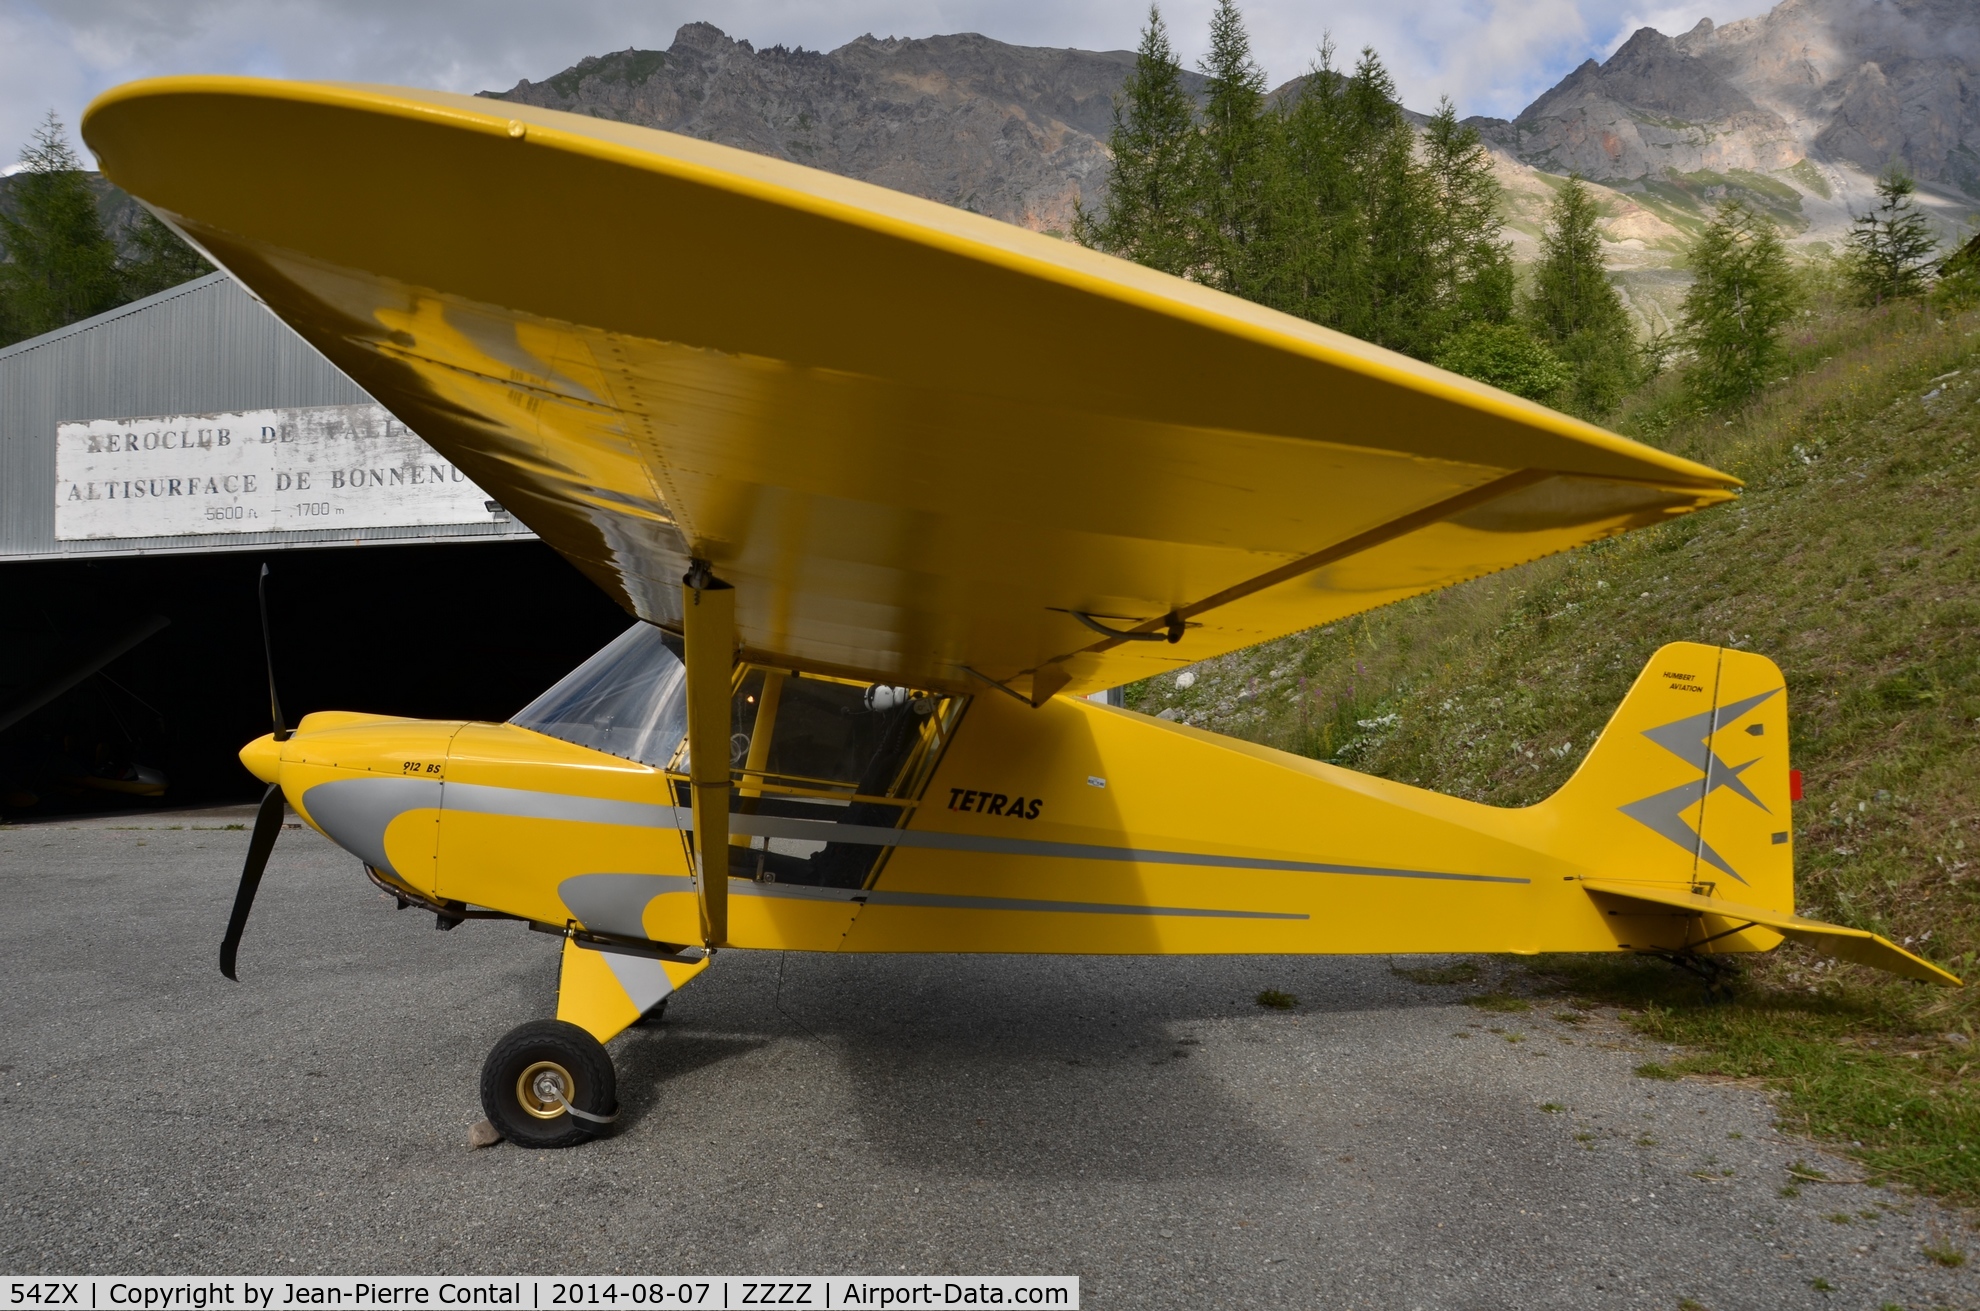 54ZX, Humbert Tétras 912 BS C/N Not found 54ZX, In front of the hangar, Valloire.